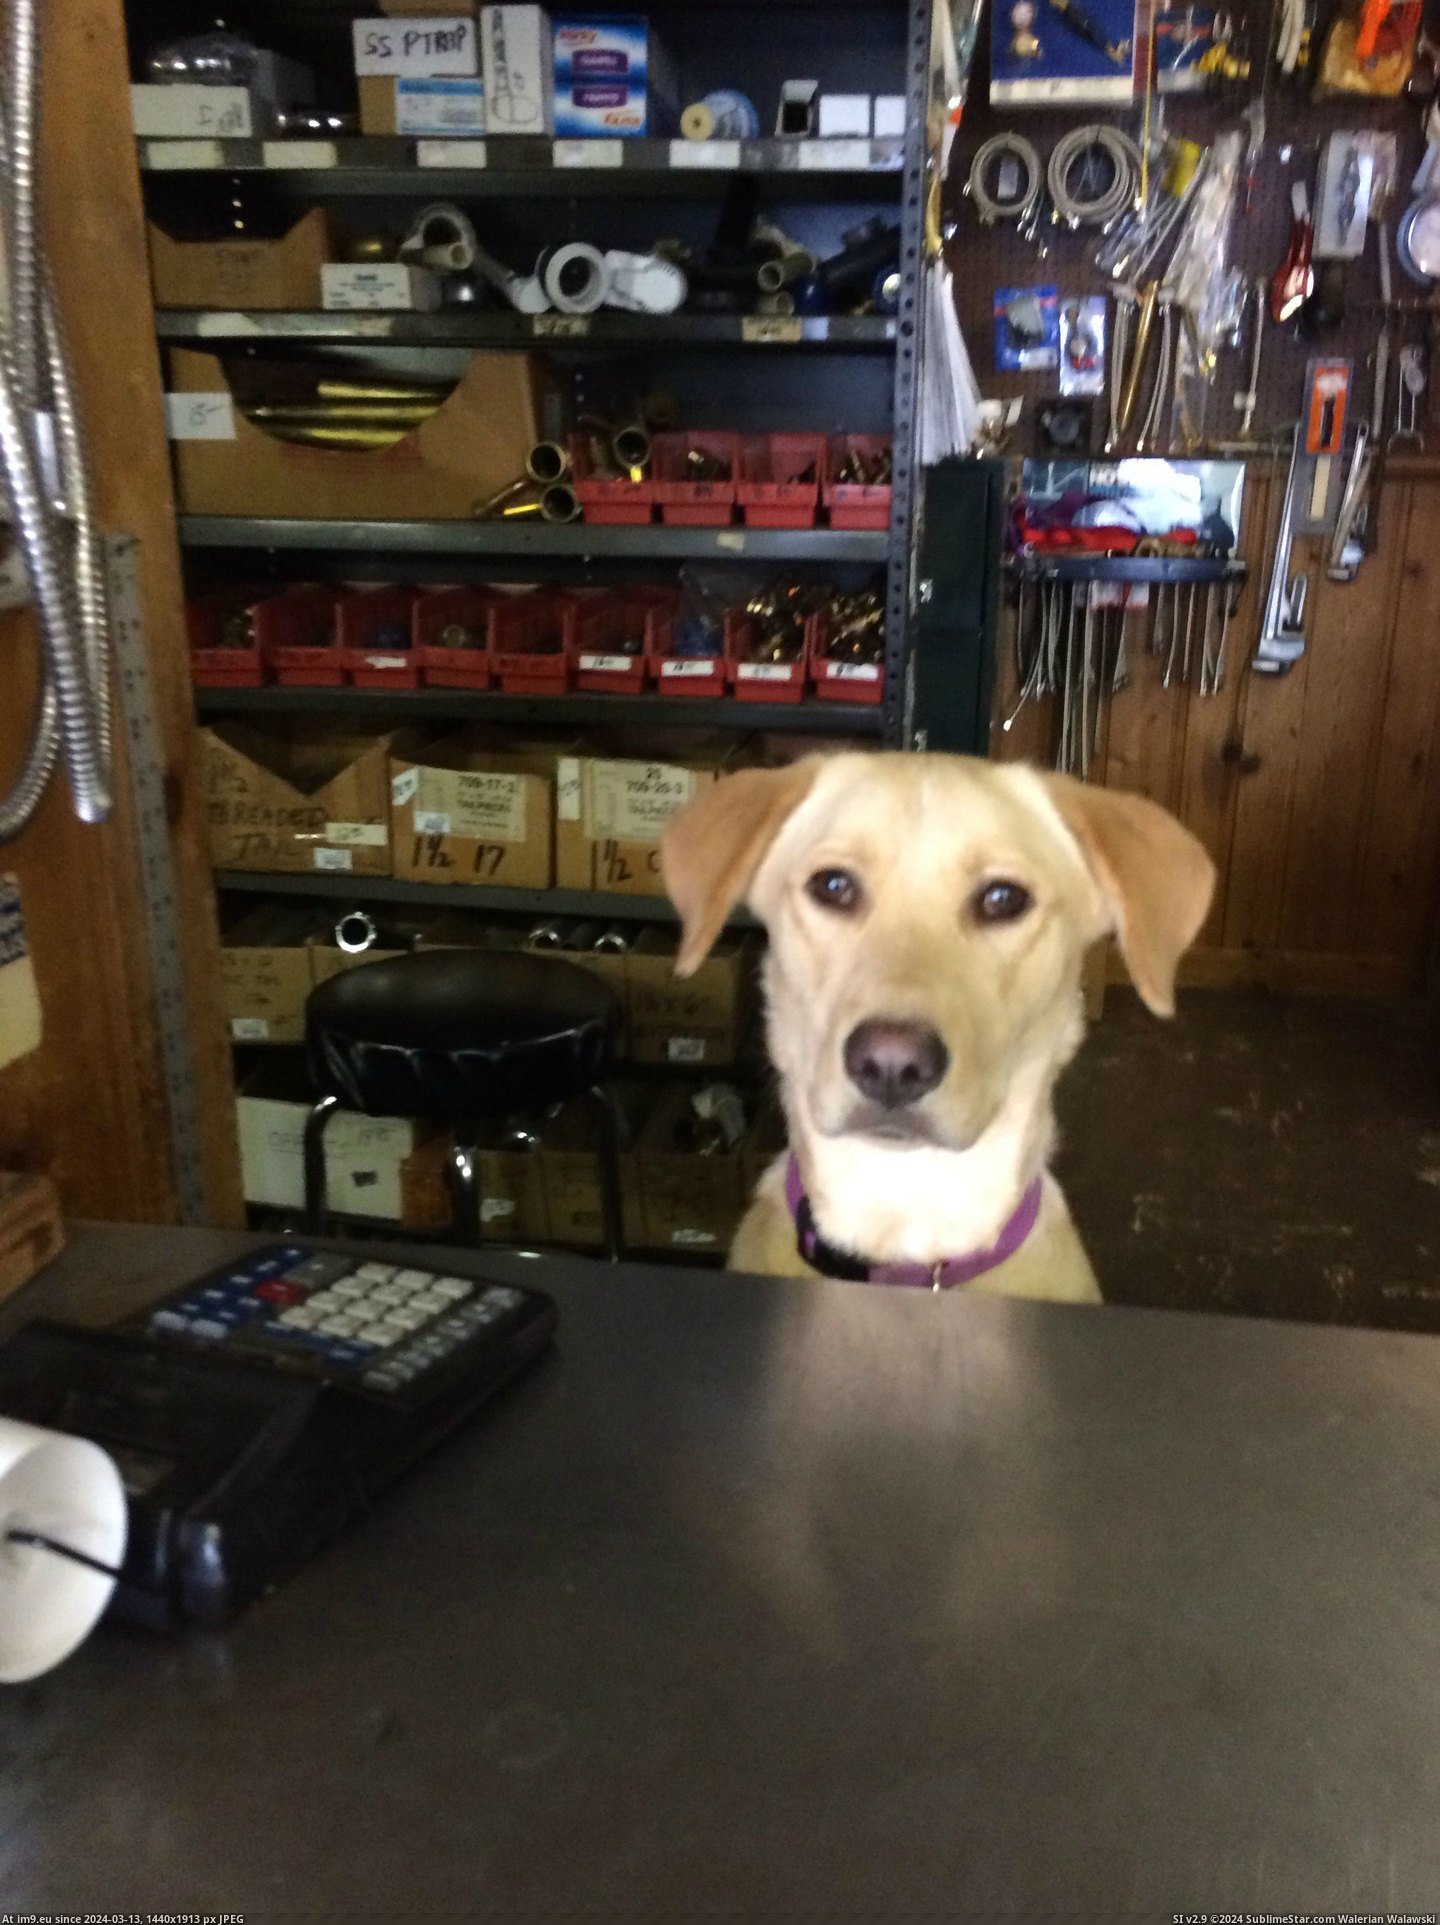 #High #She #Bit #Local #Plumbing #Bearable #Greeter #Store #Official #Supply #Prices [Aww] This is the official greeter at the local plumbing supply store. She makes the high prices a bit more bearable, at least. Pic. (Изображение из альбом My r/AWW favs))